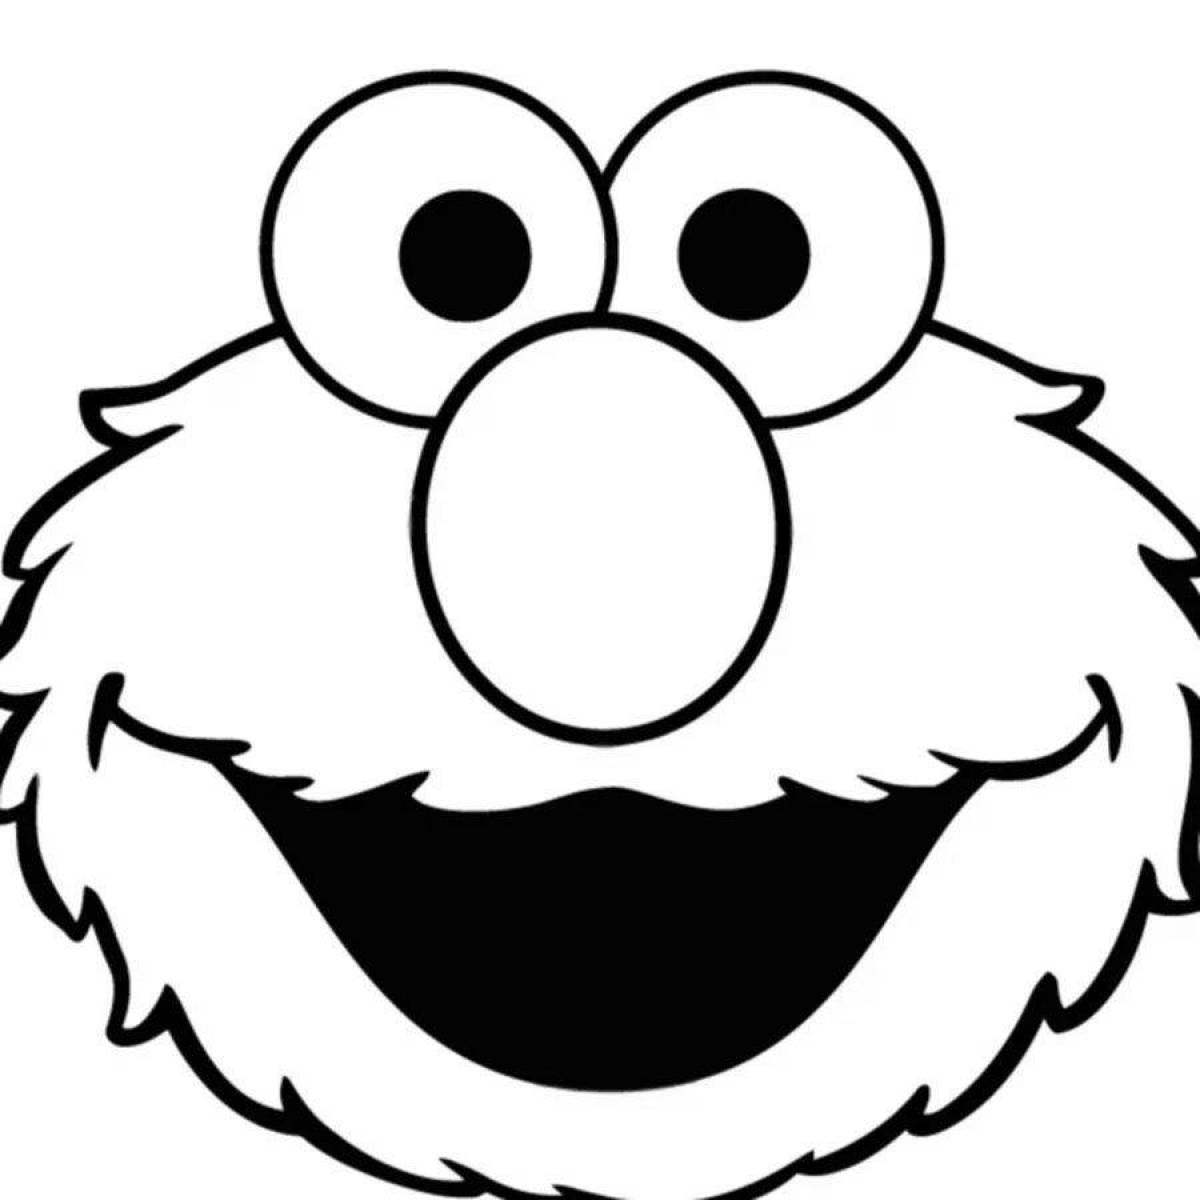 Colorful sesame street coloring page